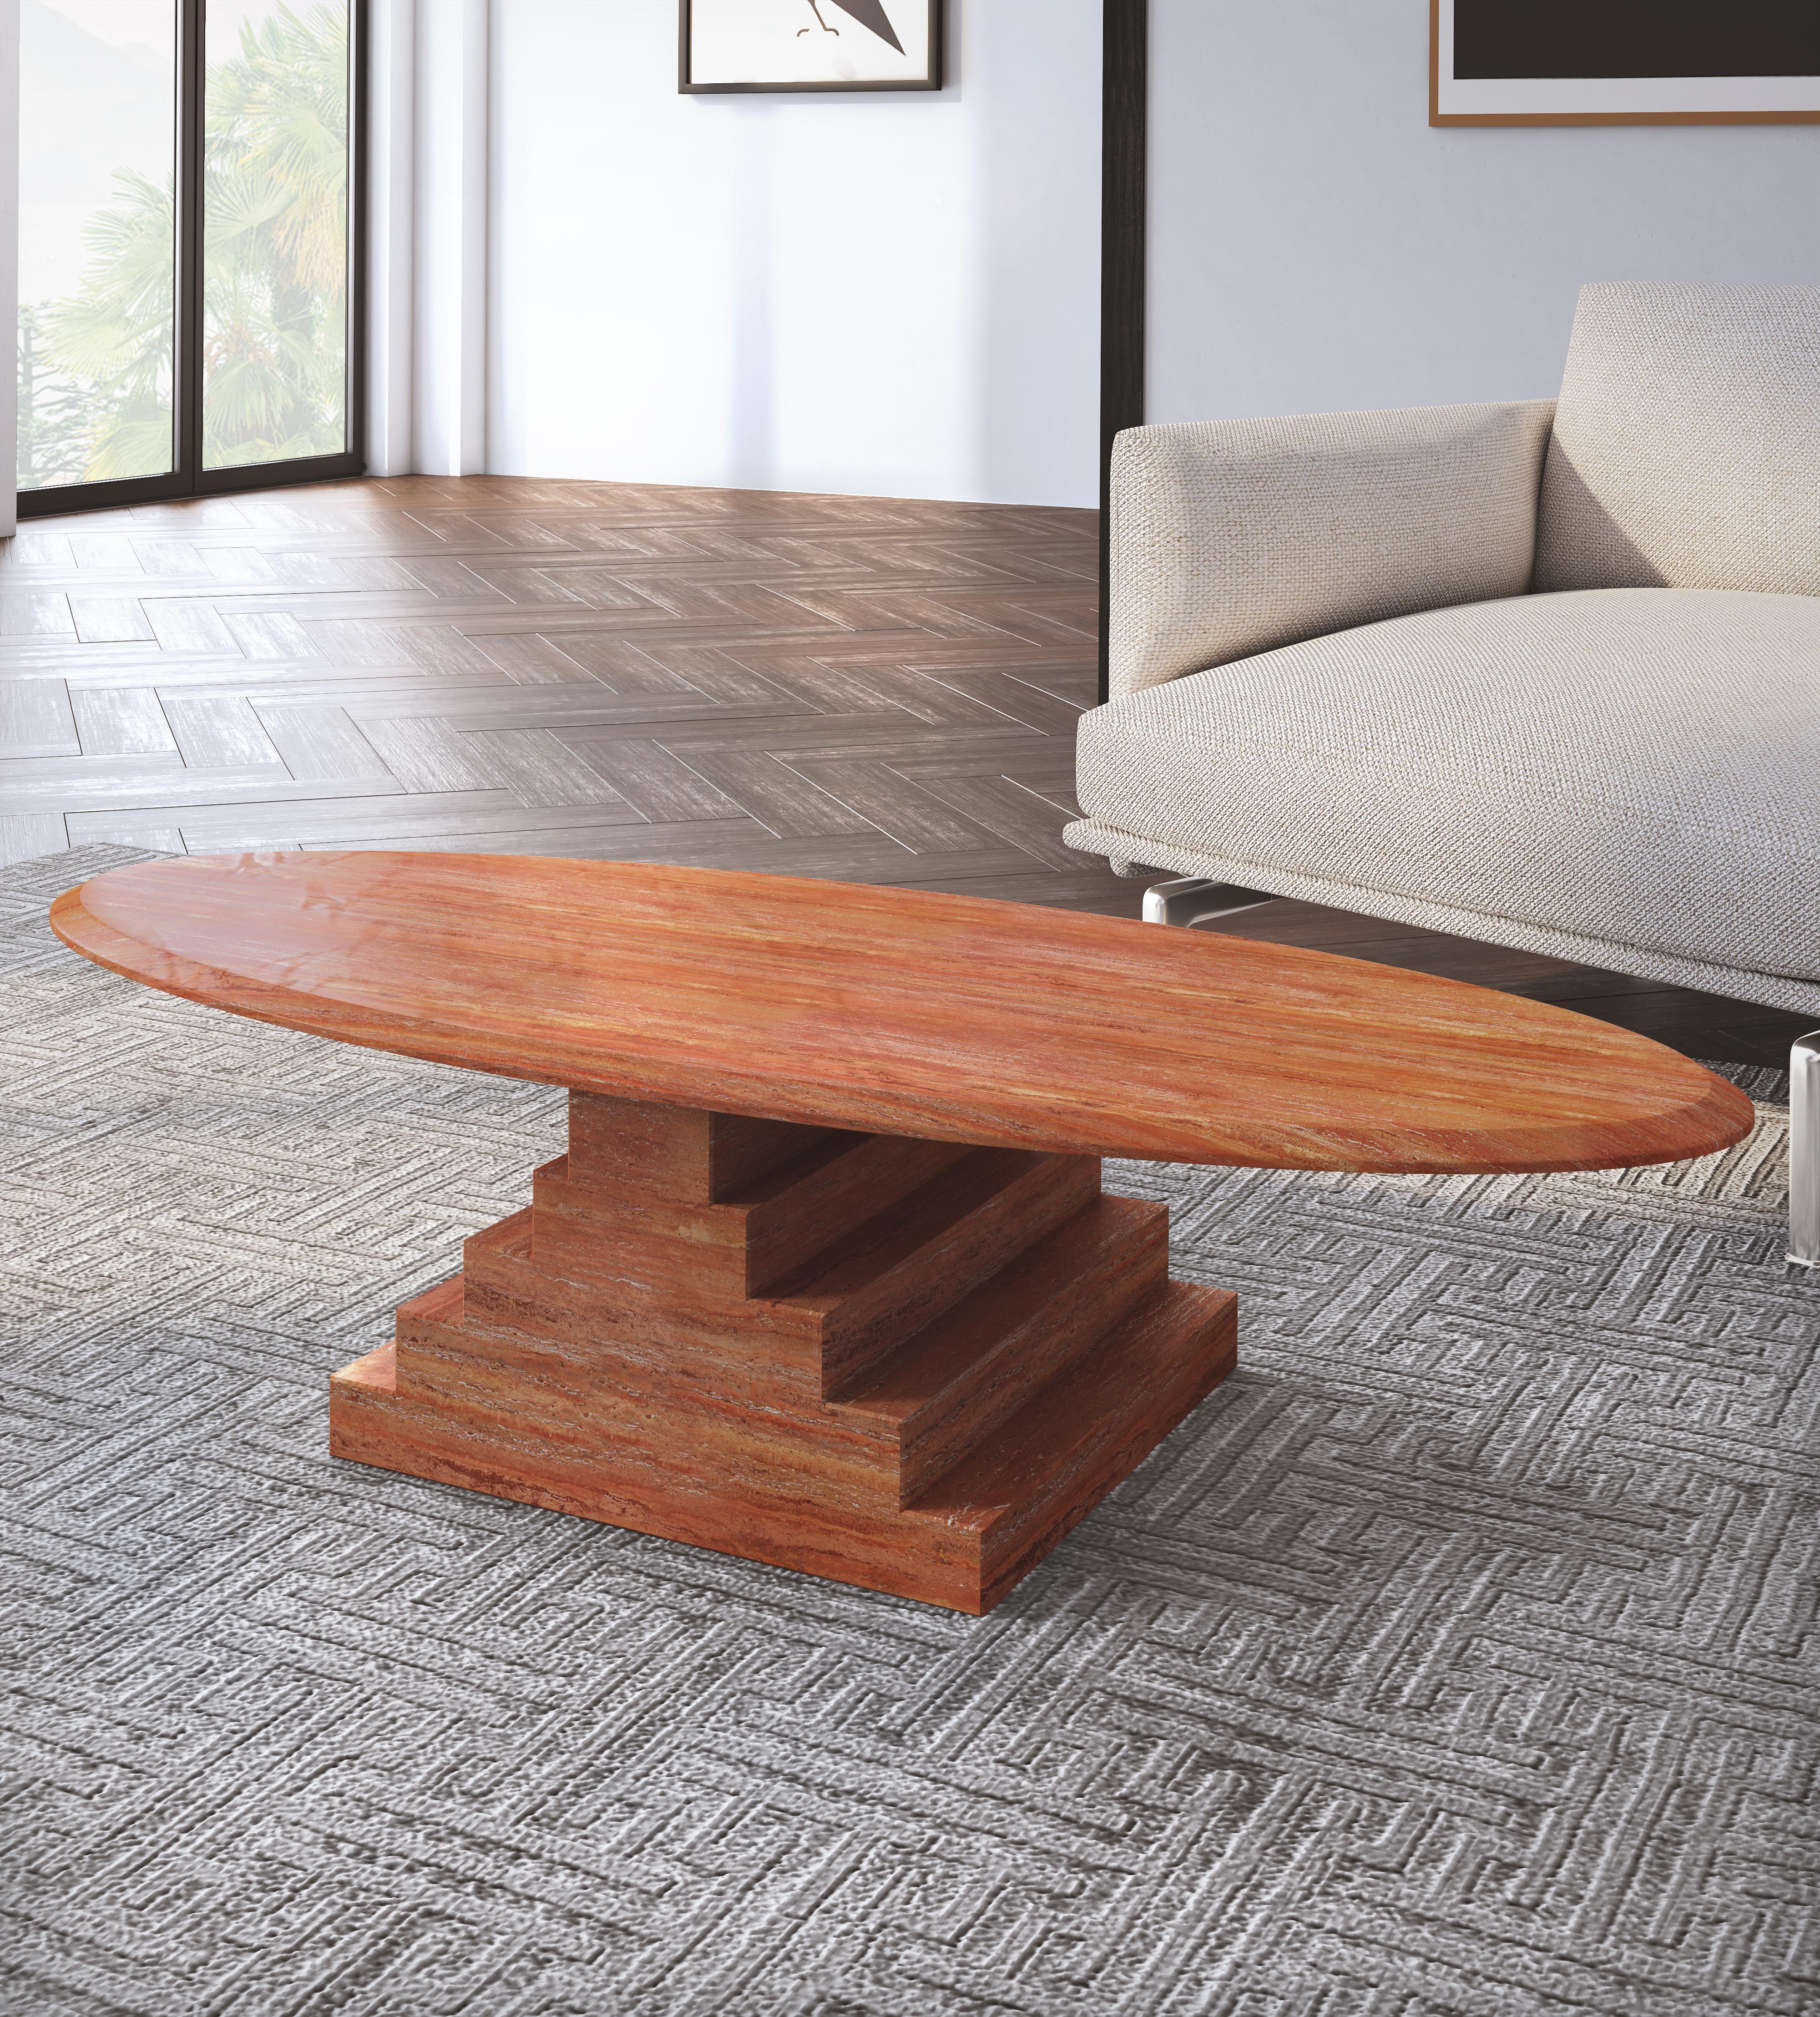 Burnished  NORDST NIKO Coffee Table, Italian Red Travertine, Danish Modern Design, New For Sale